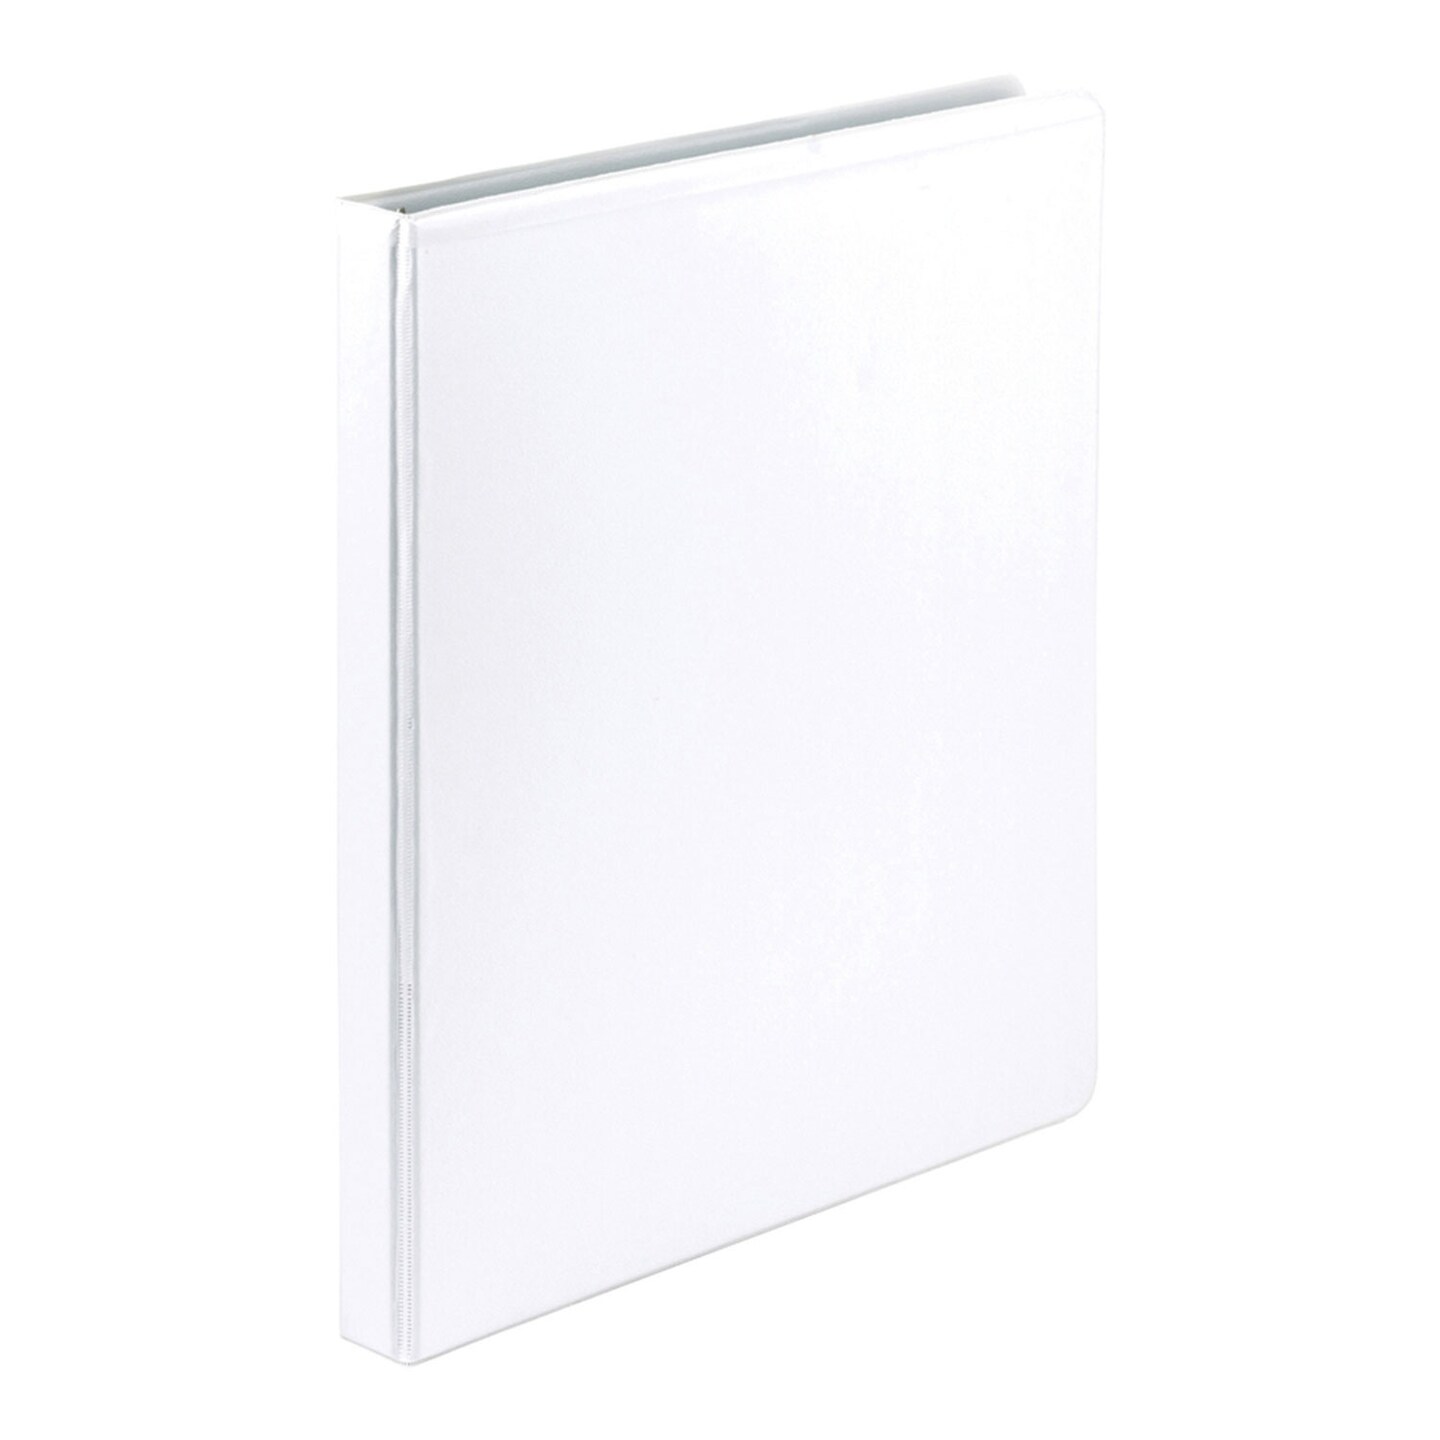 Samsill Economy 1/2 View Ring Binder - 1/2 Binder Capacity - Round Ring Fasteners - Polypropylene Chipboard - White - Recycled - Durable Clear Overlay - 12 / Carton